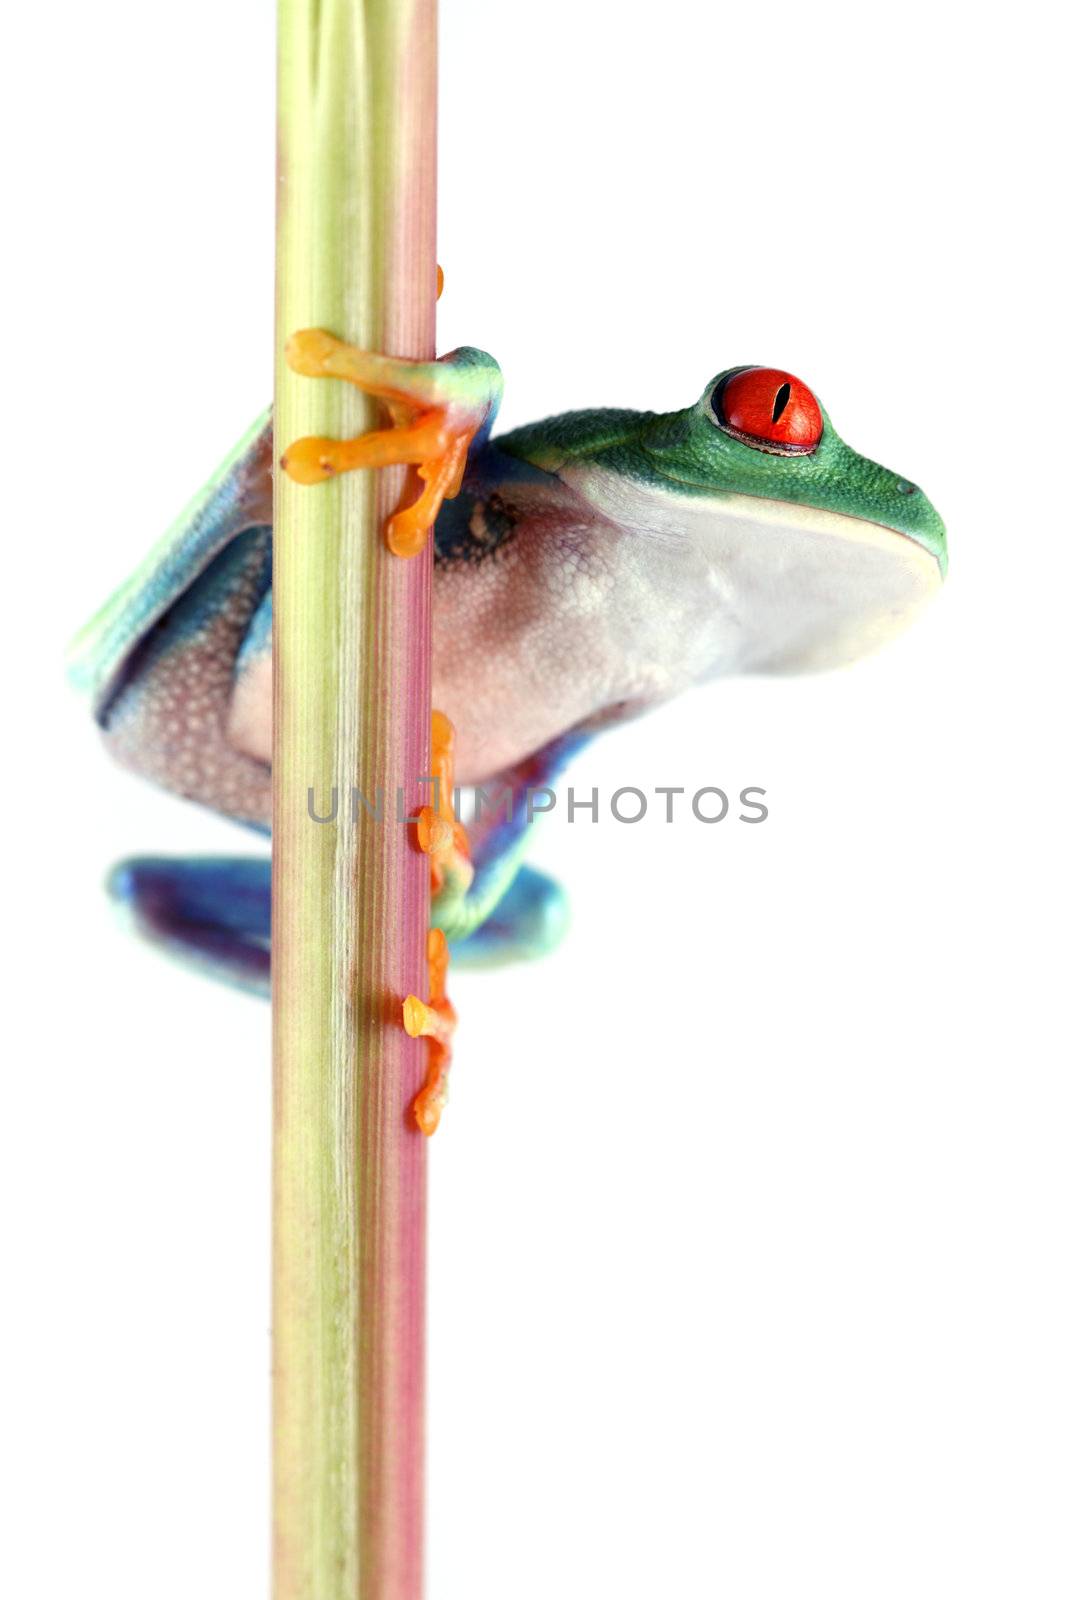 A Red-Eyed Tree Frog (Agalychnis callidryas) on a stem of a plant shot on a solid white background.